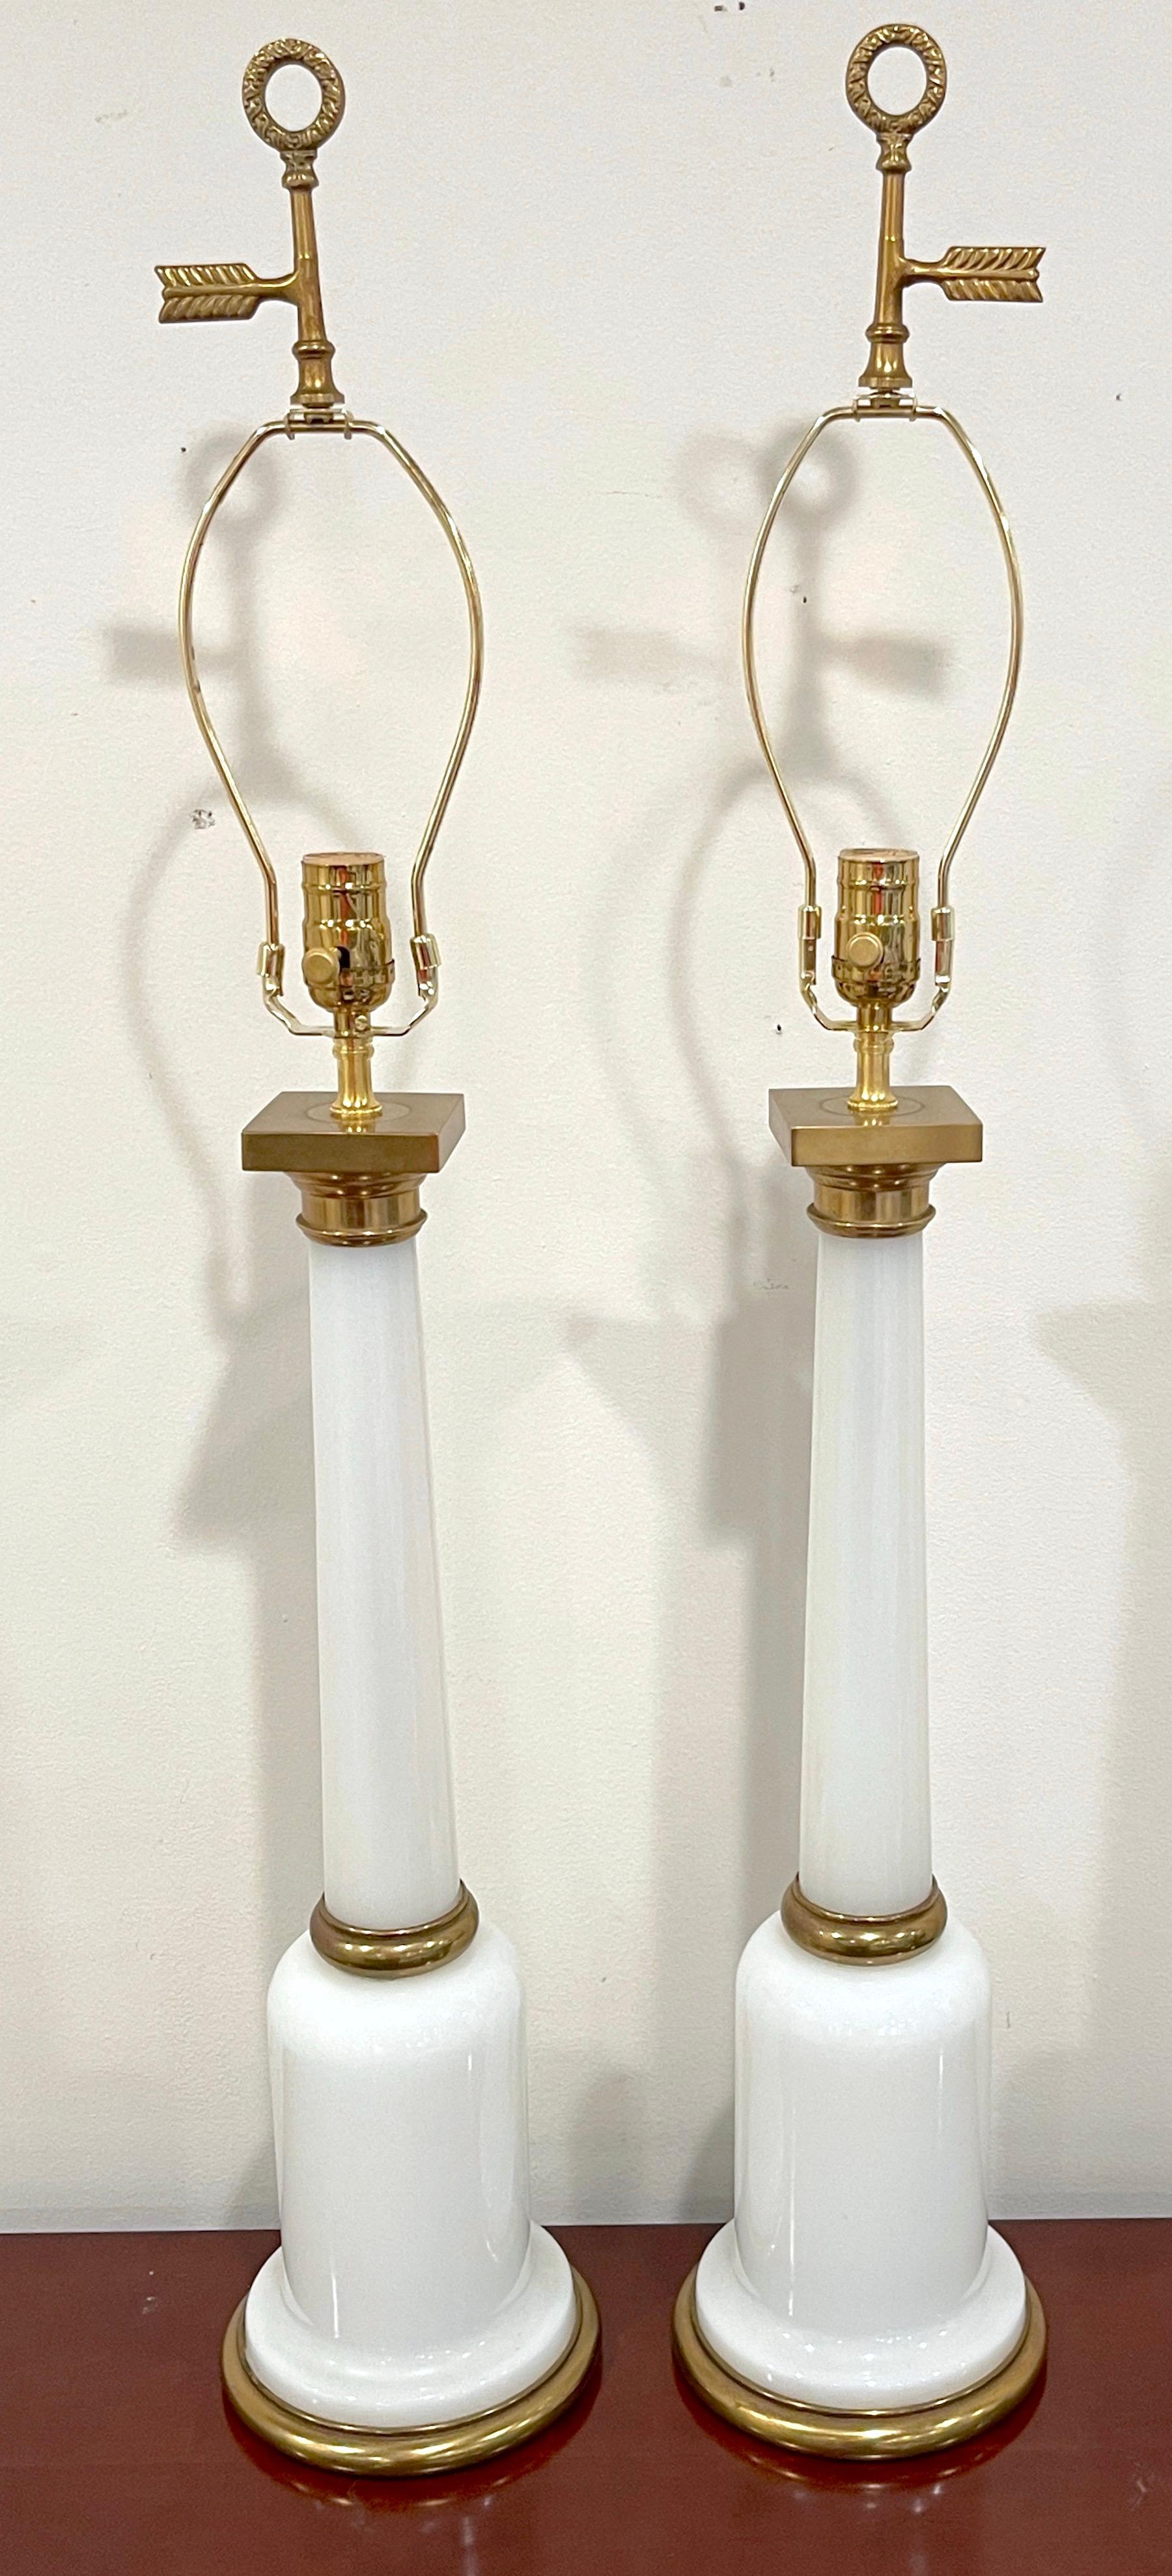 Pair French Bronze Mounted Neoclassical Column & Arrow Motif Opaline Lamps 
France, circa 1960s

Each one a tall and sleek architectural column, with a gilt bronze capital, fitted with optional Arrow/ Bouillotte finials. Rewired, ready to shade